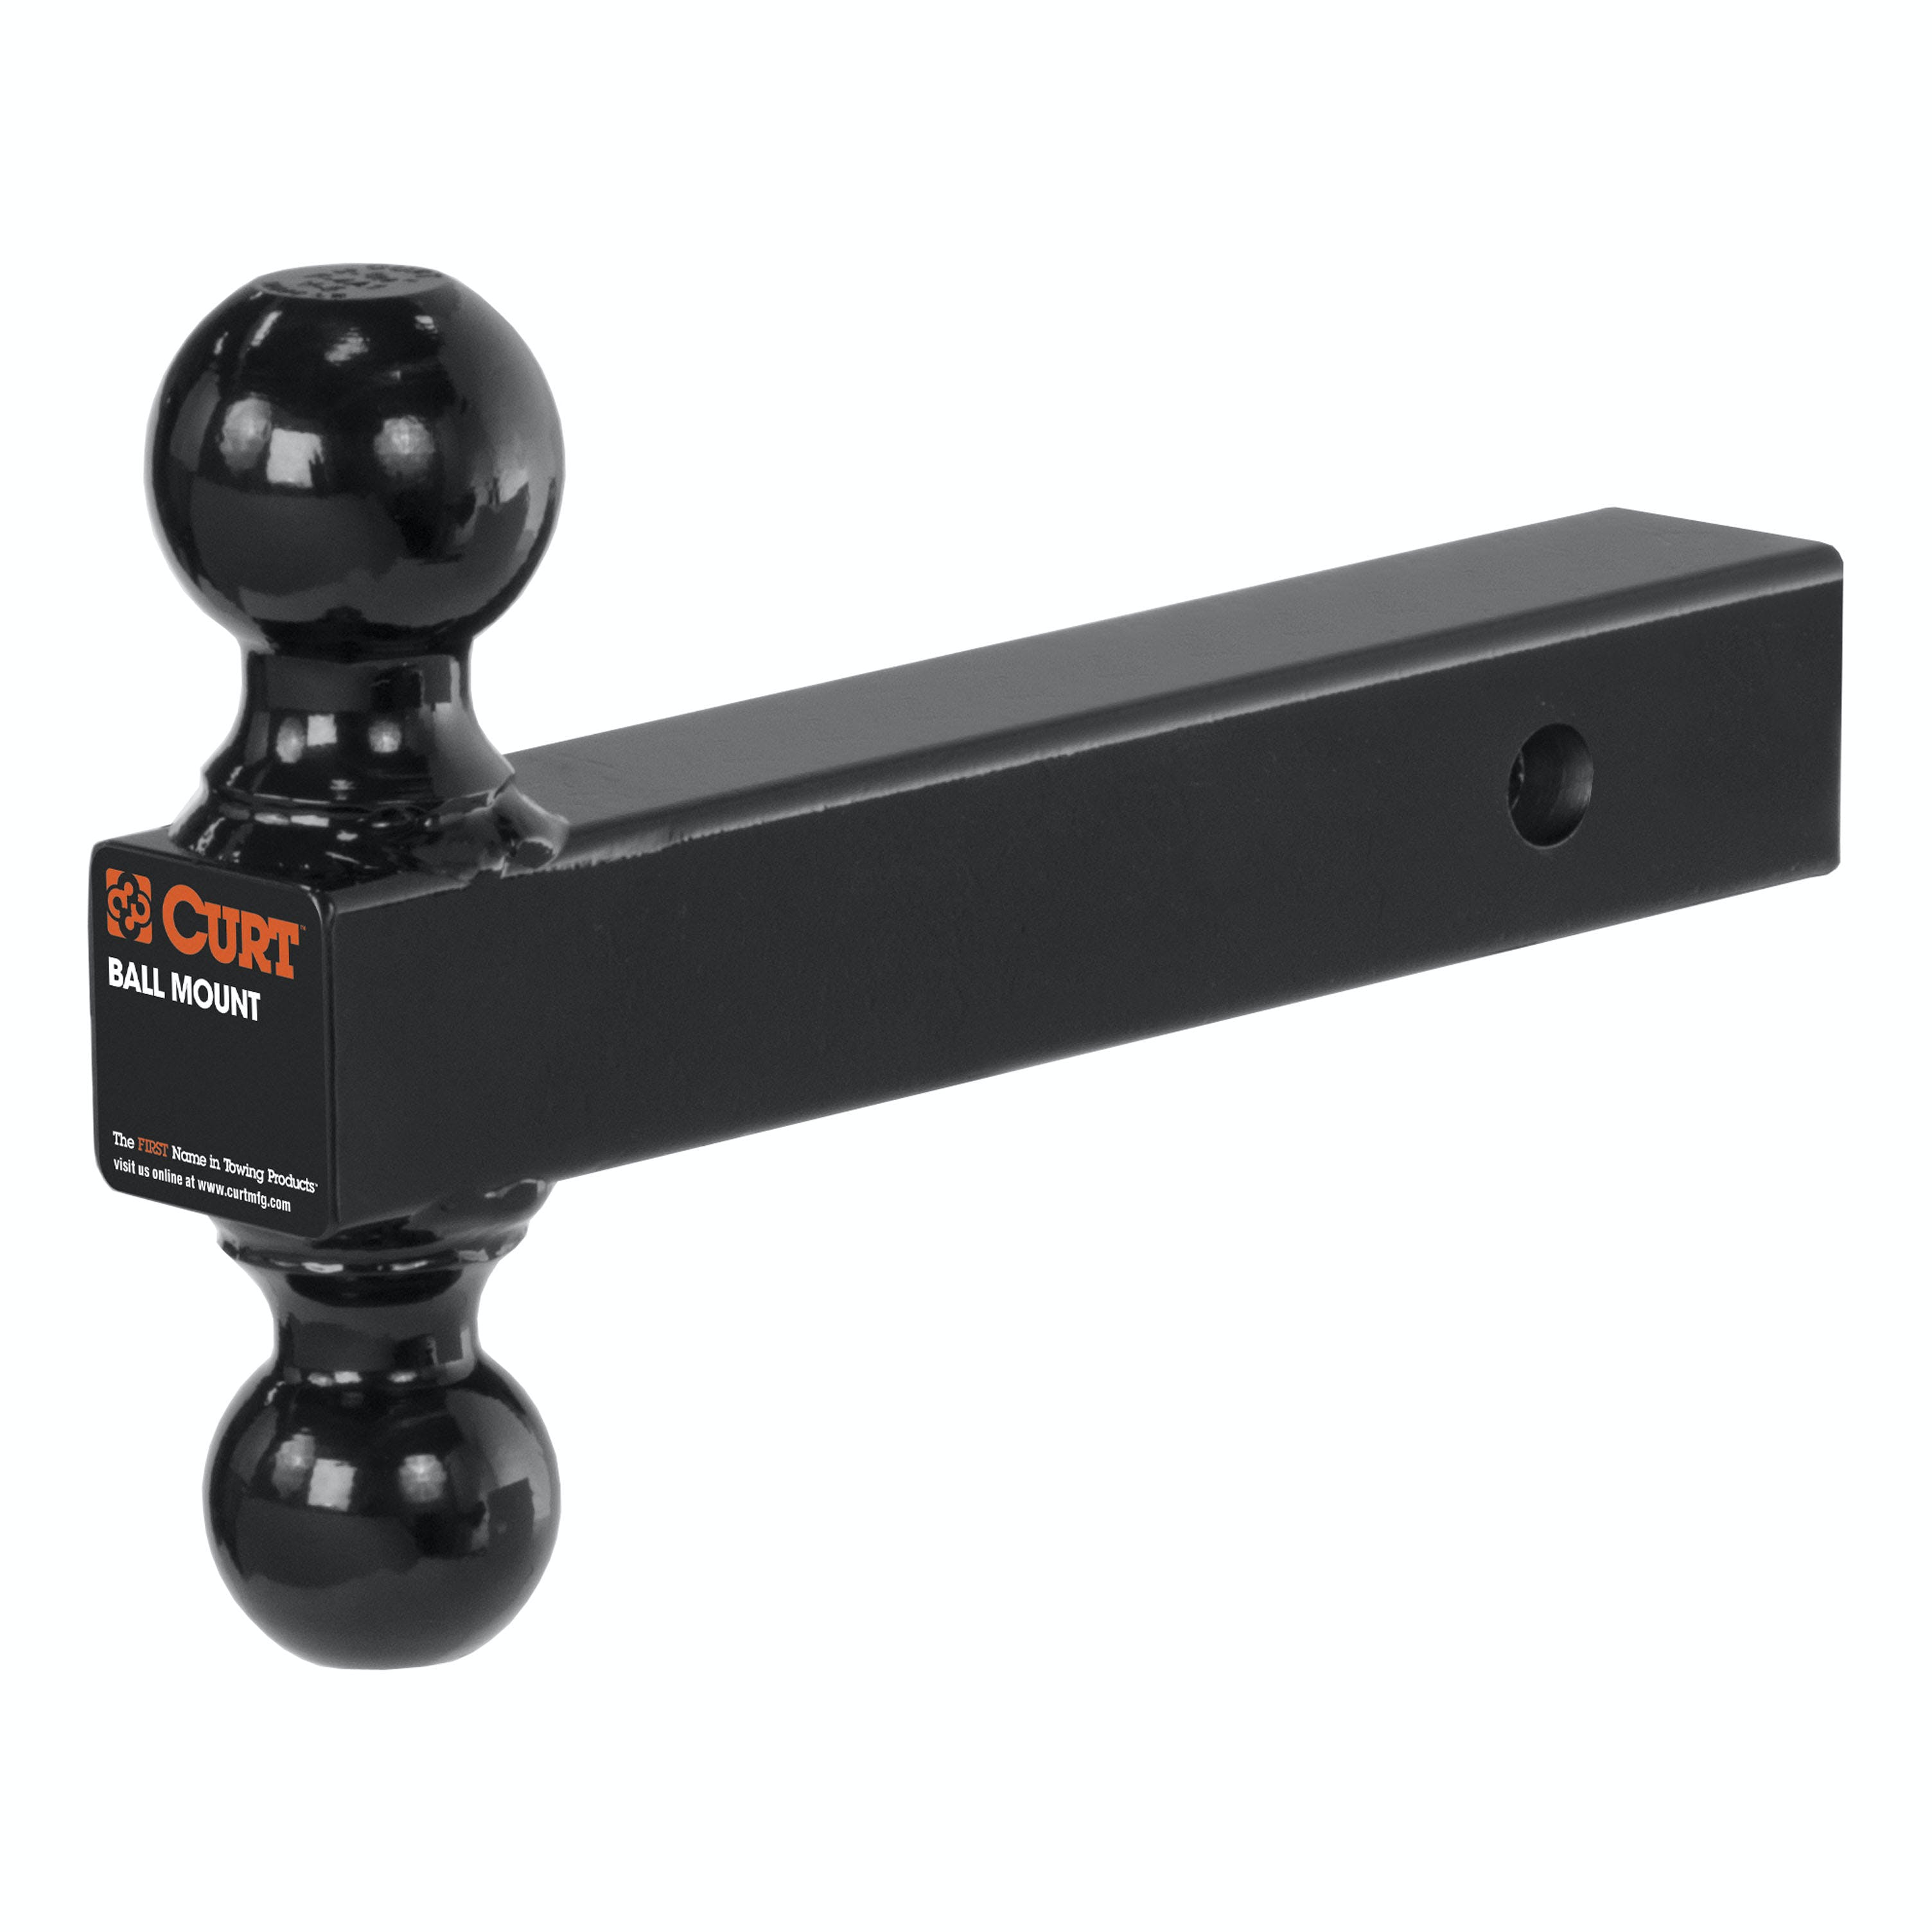 CURT 45660 Multi-Ball Mount (2 Solid Shank, 2 and 2-5/16 Black Balls)